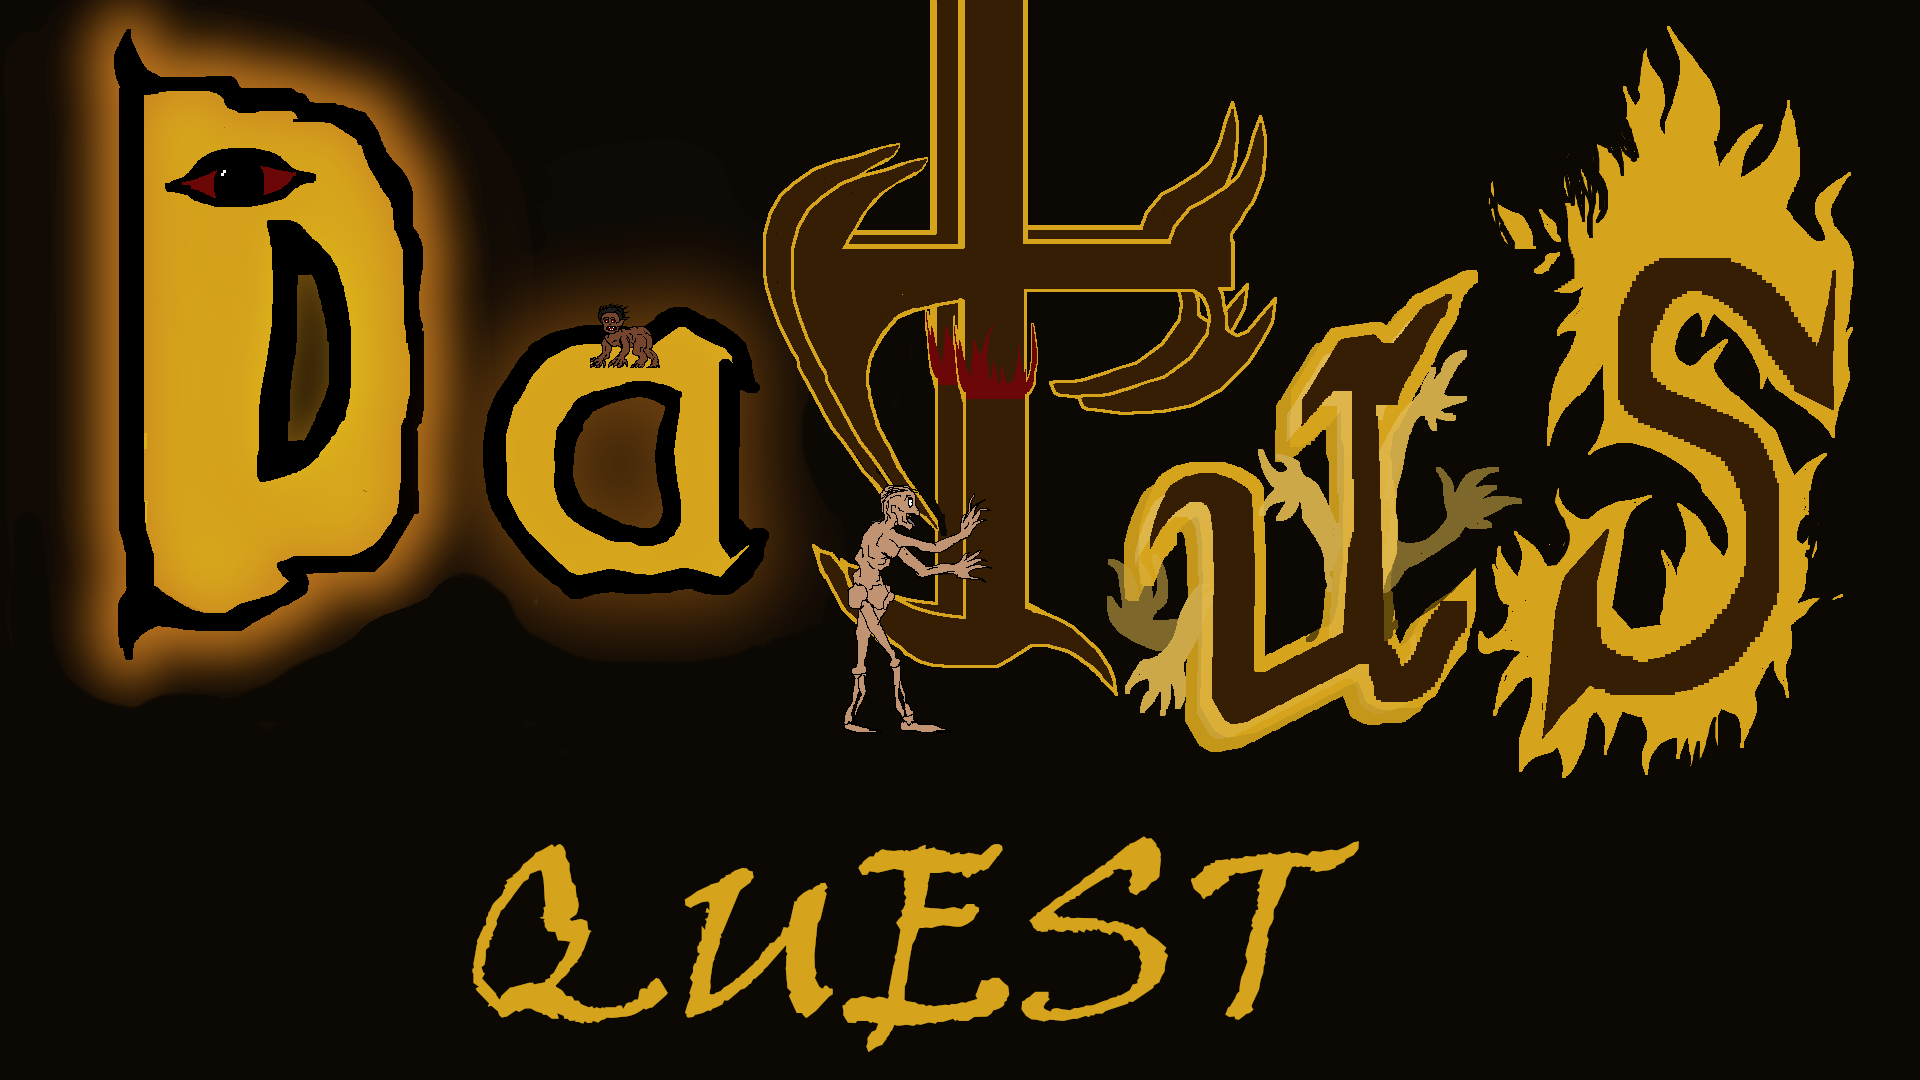 Datus Quest "Journey to the Maligno Realm"